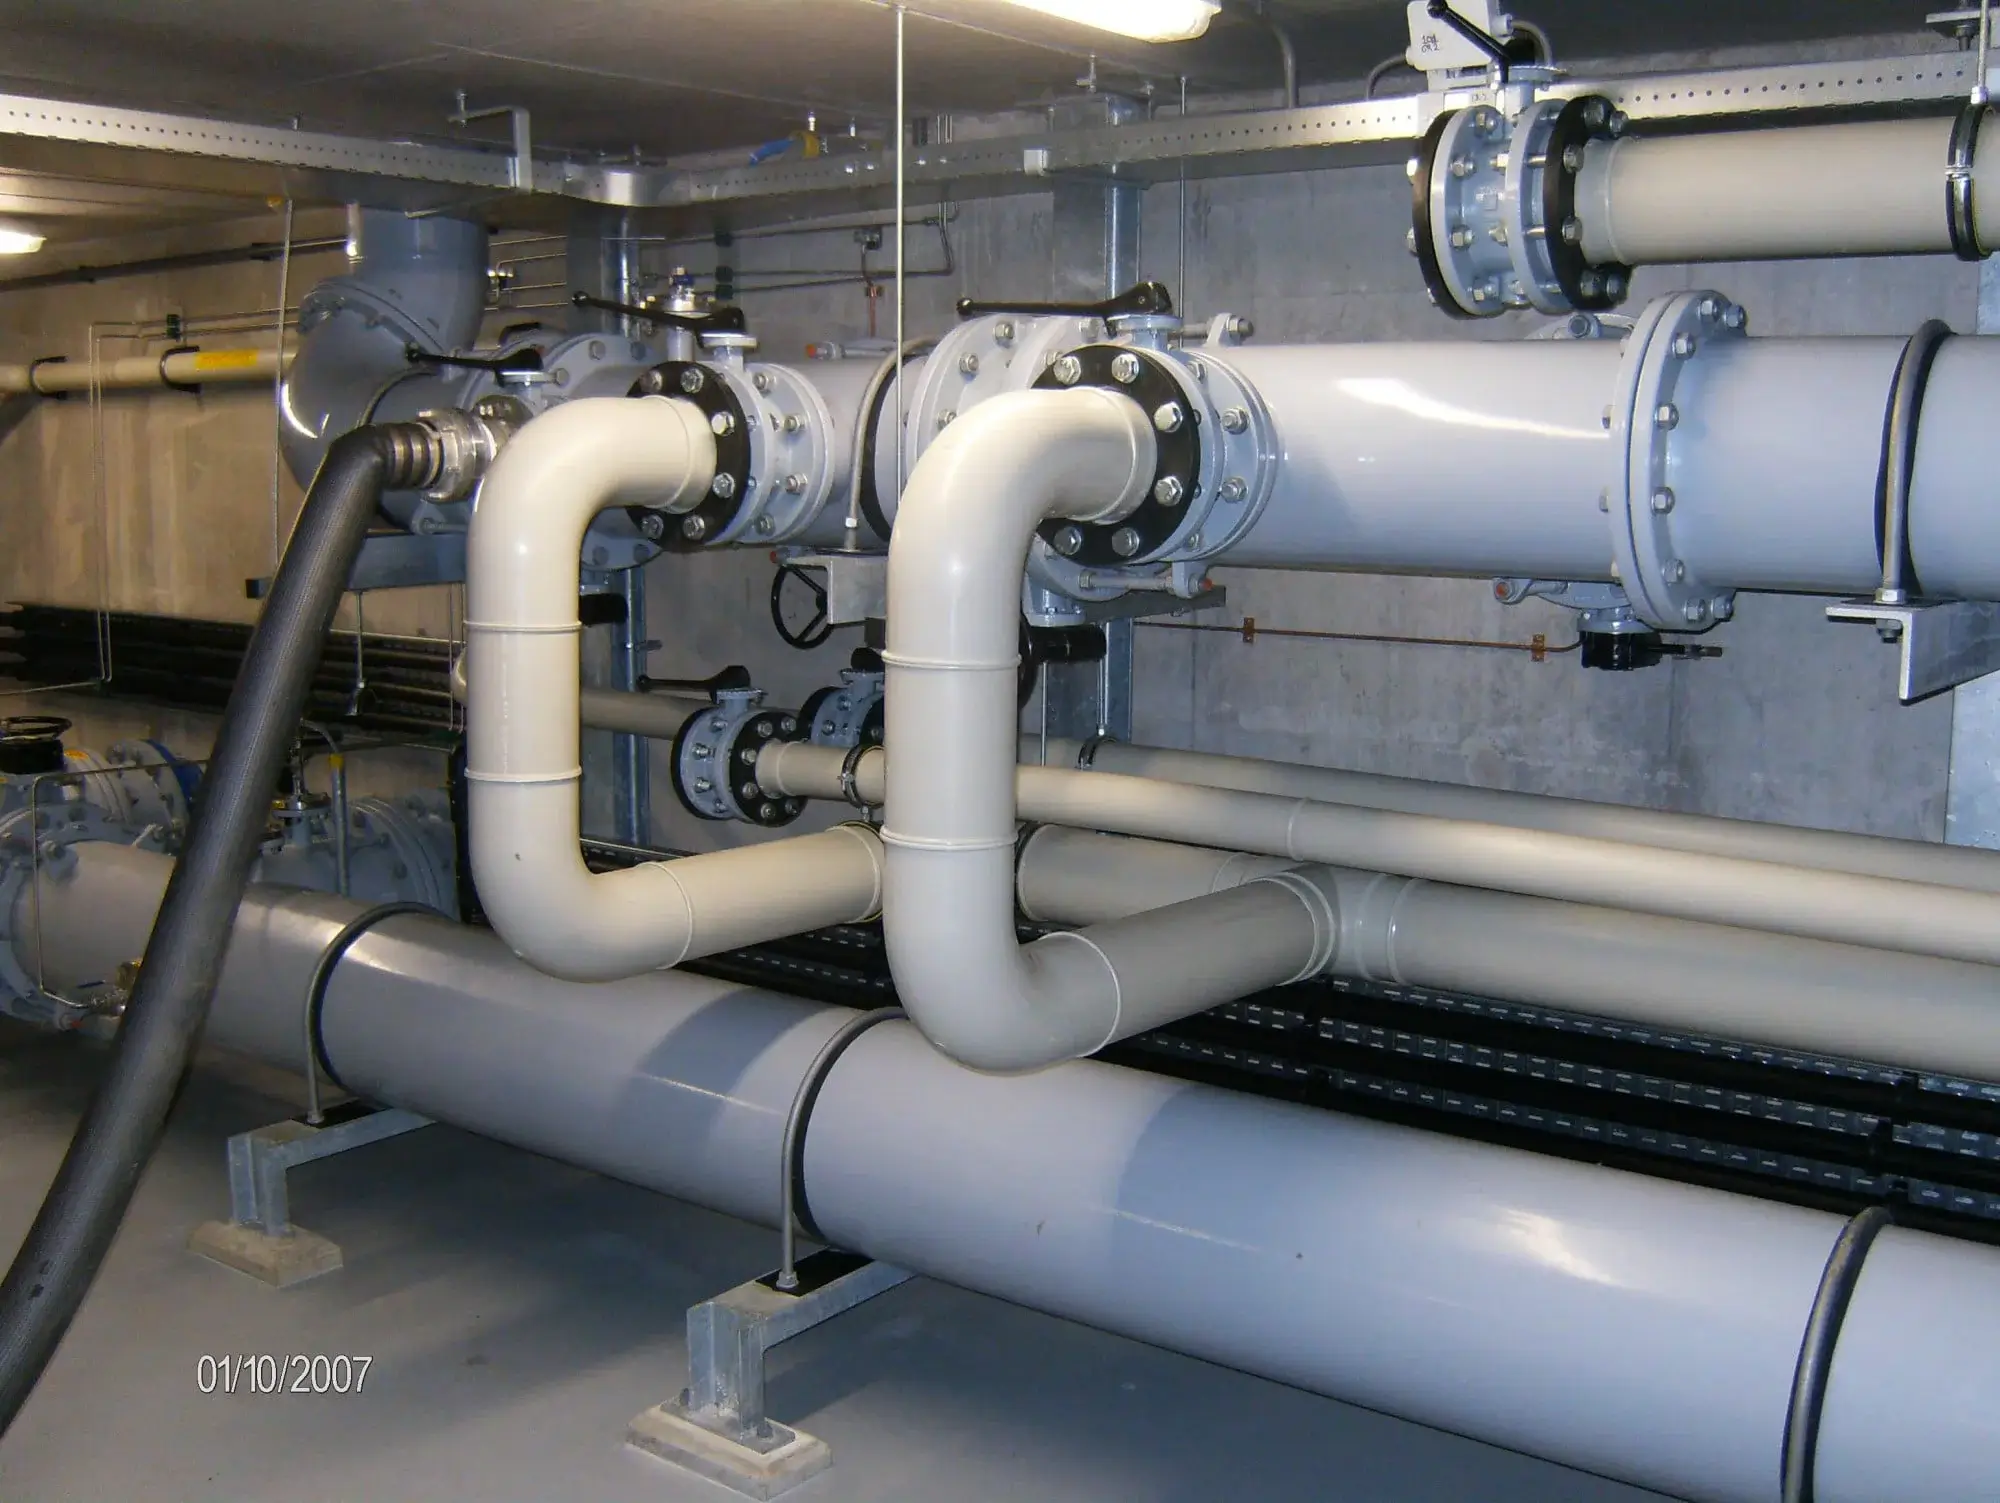 You are currently viewing سوالات متداول در پایپینگ Piping | آهن نرخ